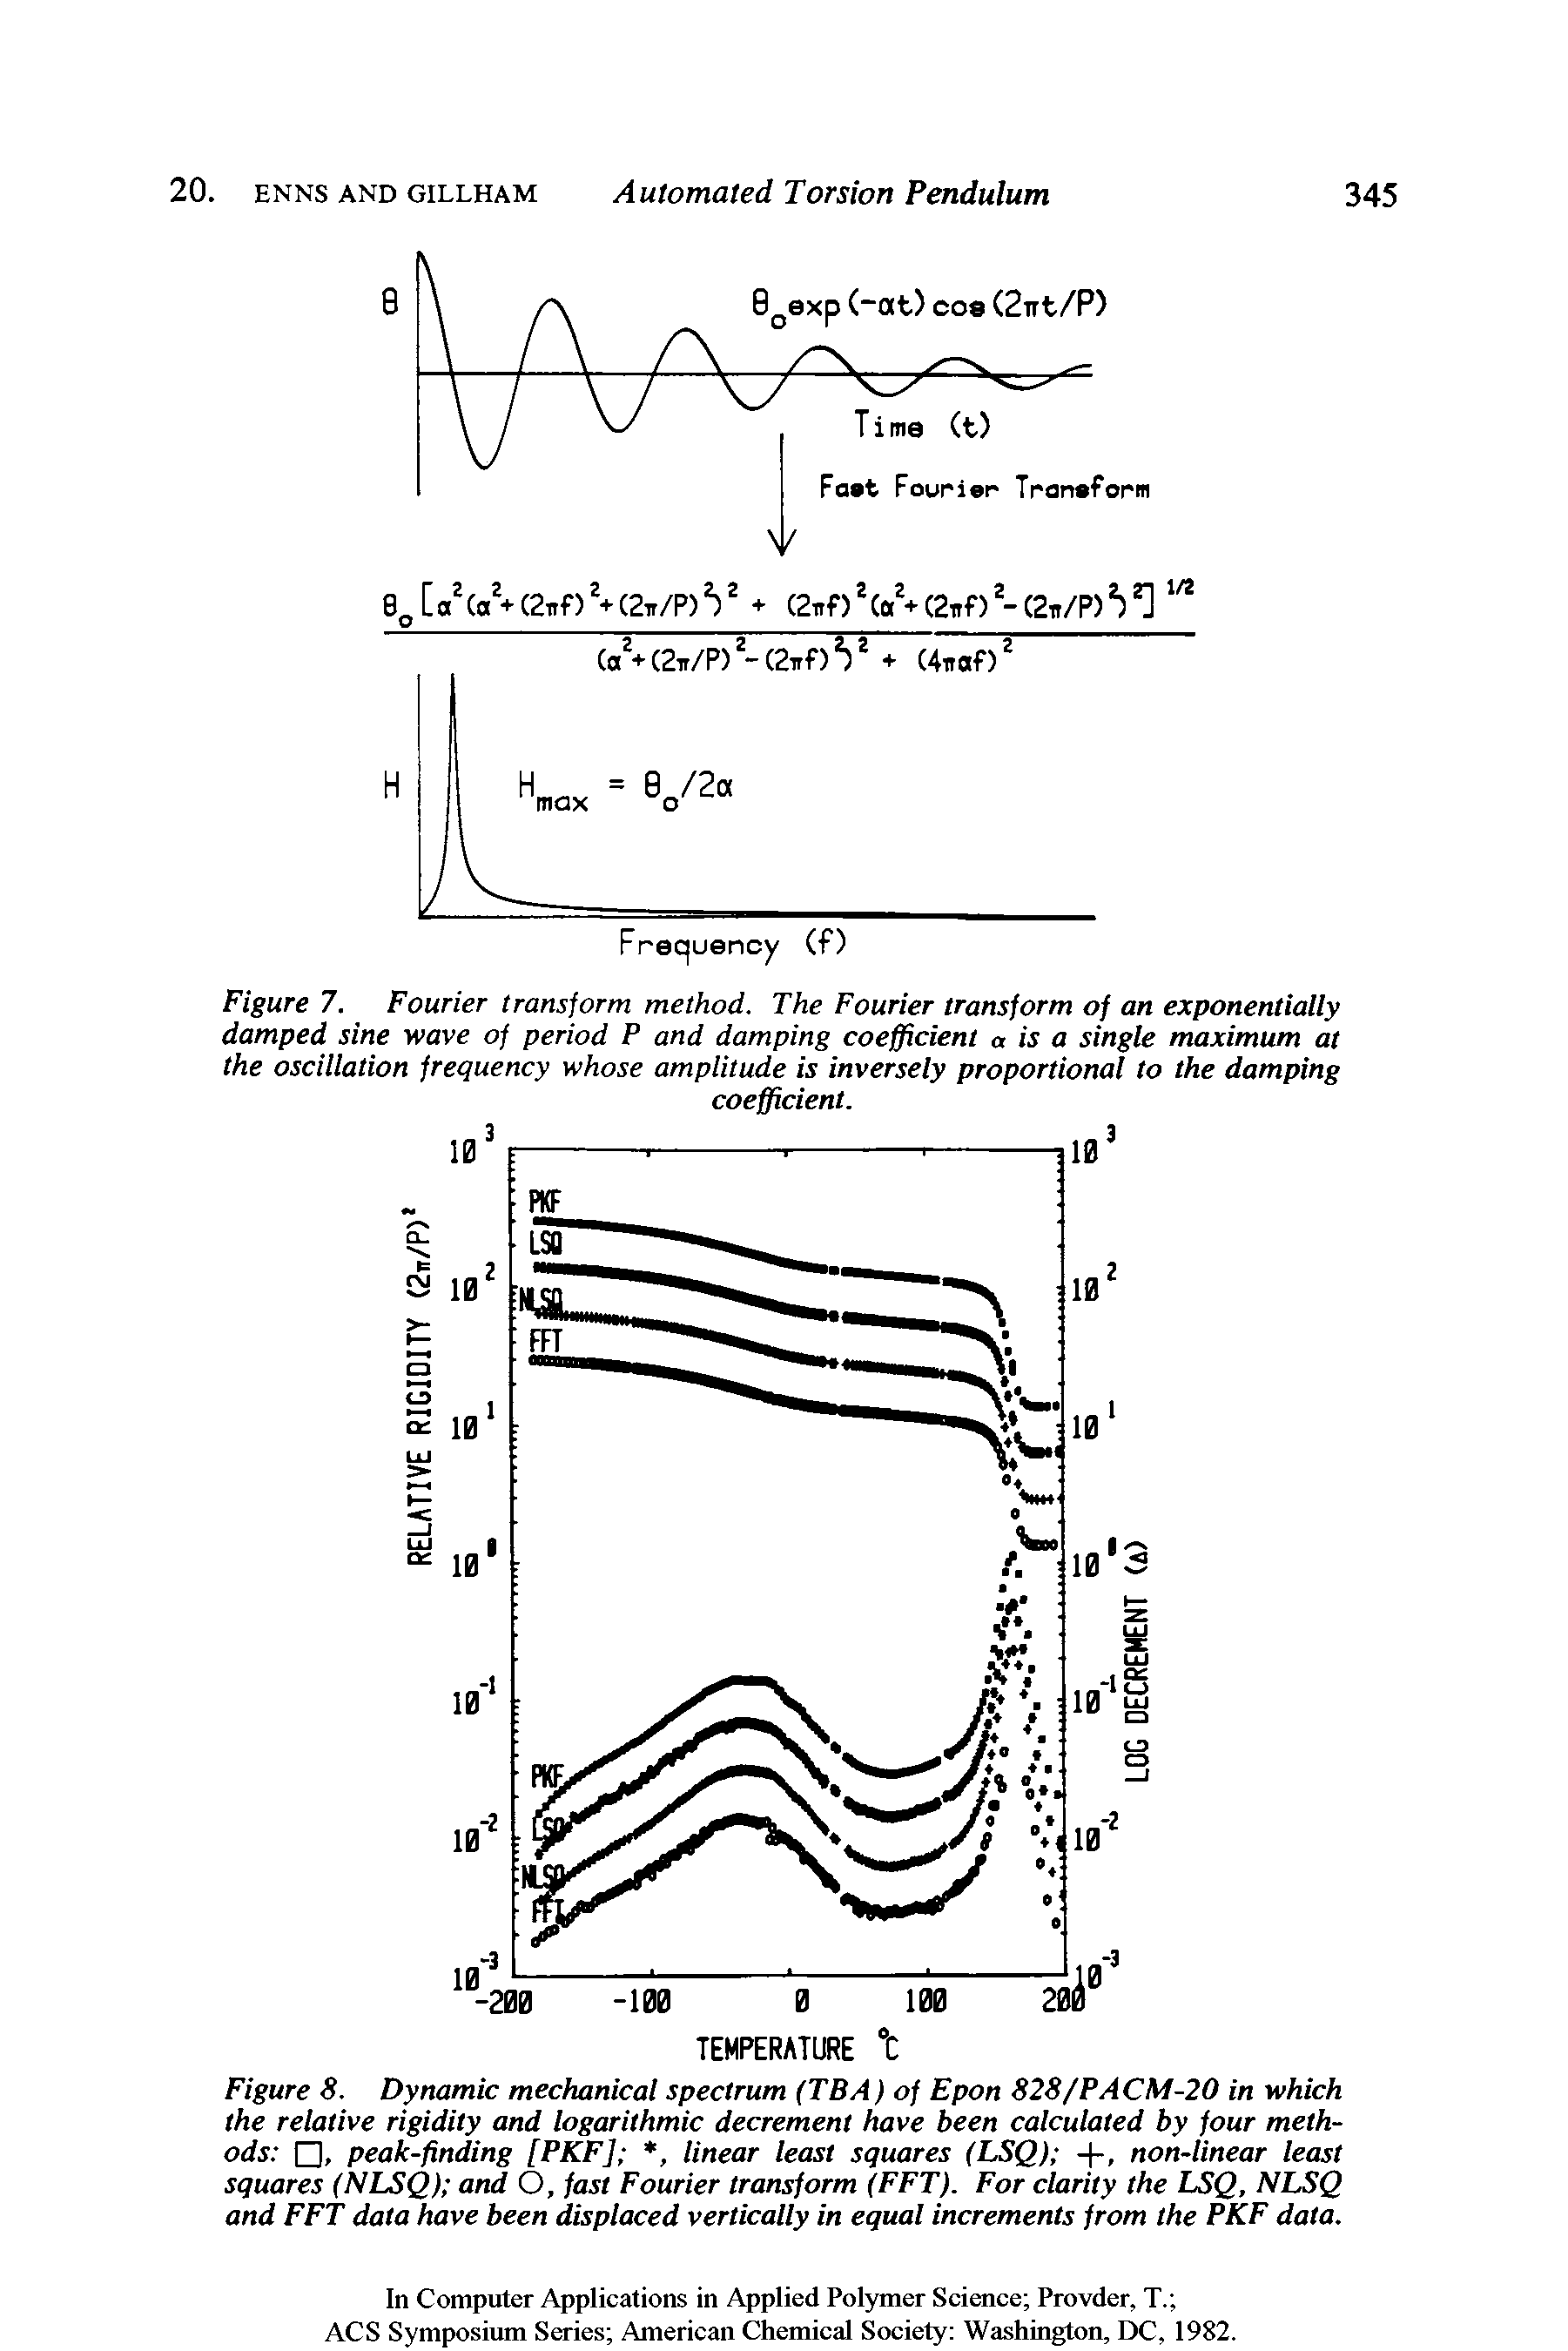 Figure 8. Dynamic mechanical spectrum (TBA) of Epon 828/PACM-20 in which the relative rigidity and logarithmic decrement have been calculated by four methods , peak-finding [PKF] , linear least squares (LSQ) +, non-linear least squares (NLSQ) and O, fast Fourier transform (FFT). For clarity the LSQ, NLSQ and FFT data have been displaced vertically in equal increments from the PKF data.